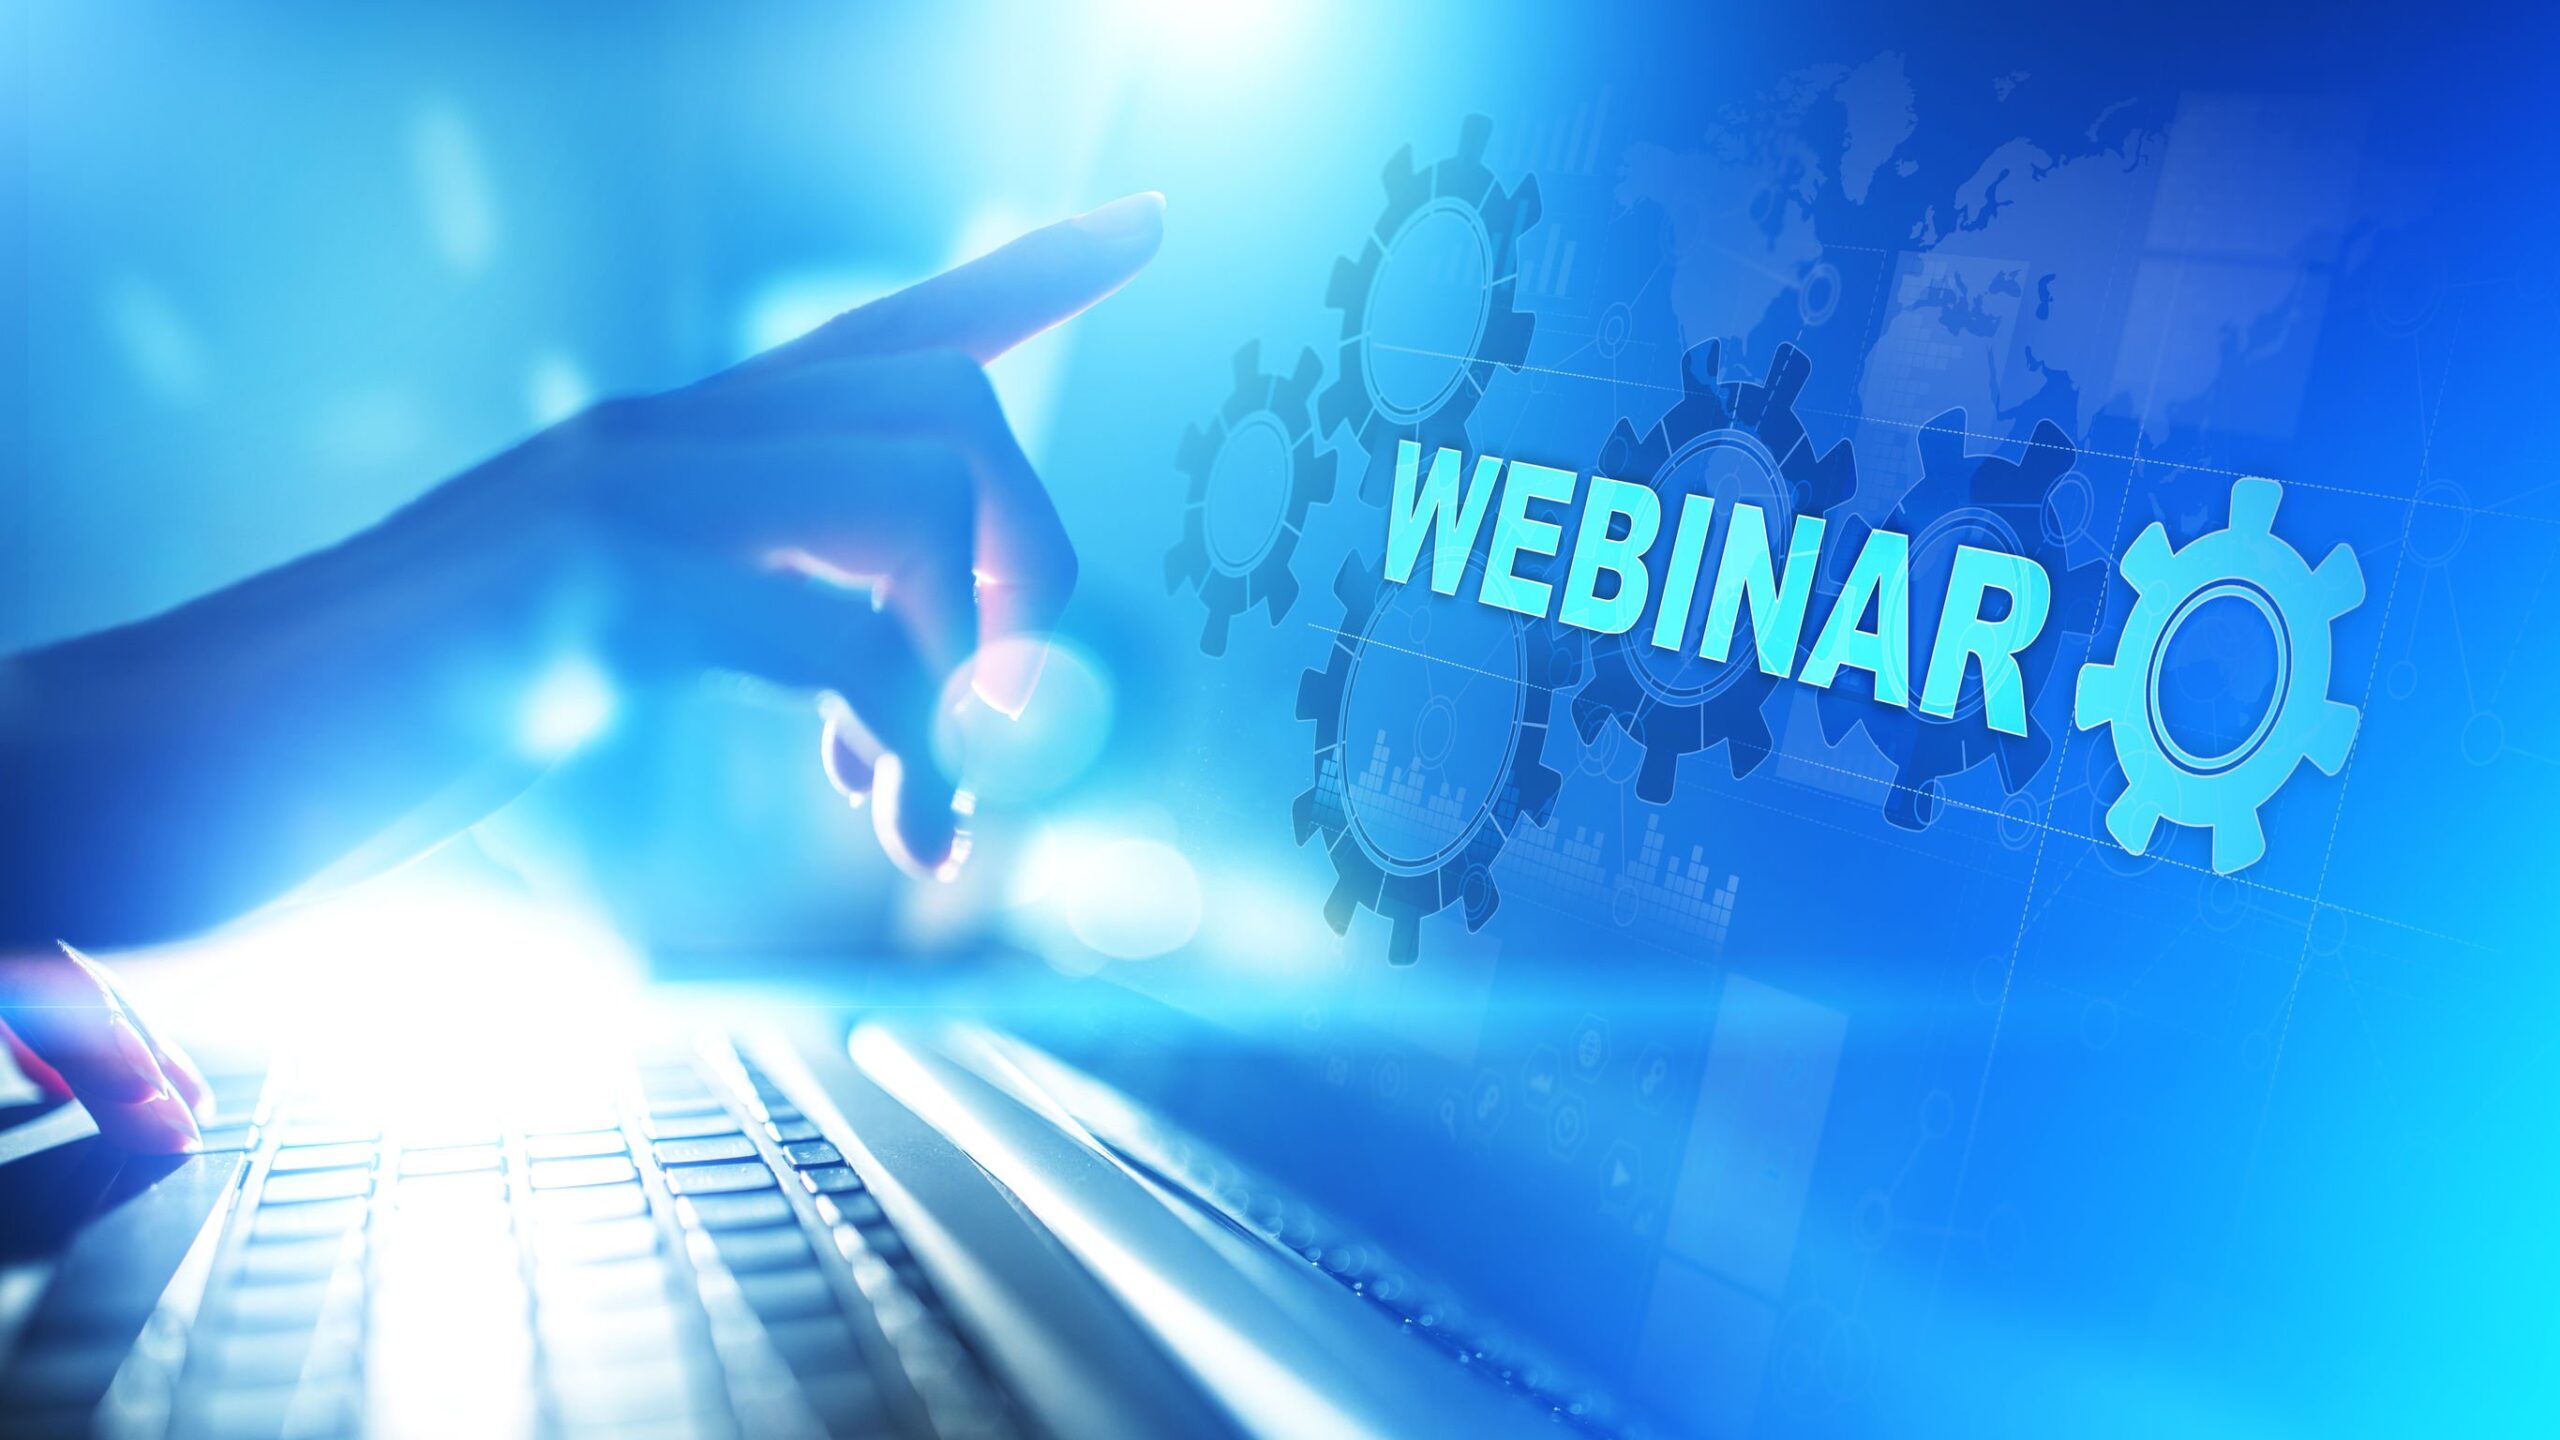 Learn How to Streamline Your Business in Our August Webinars